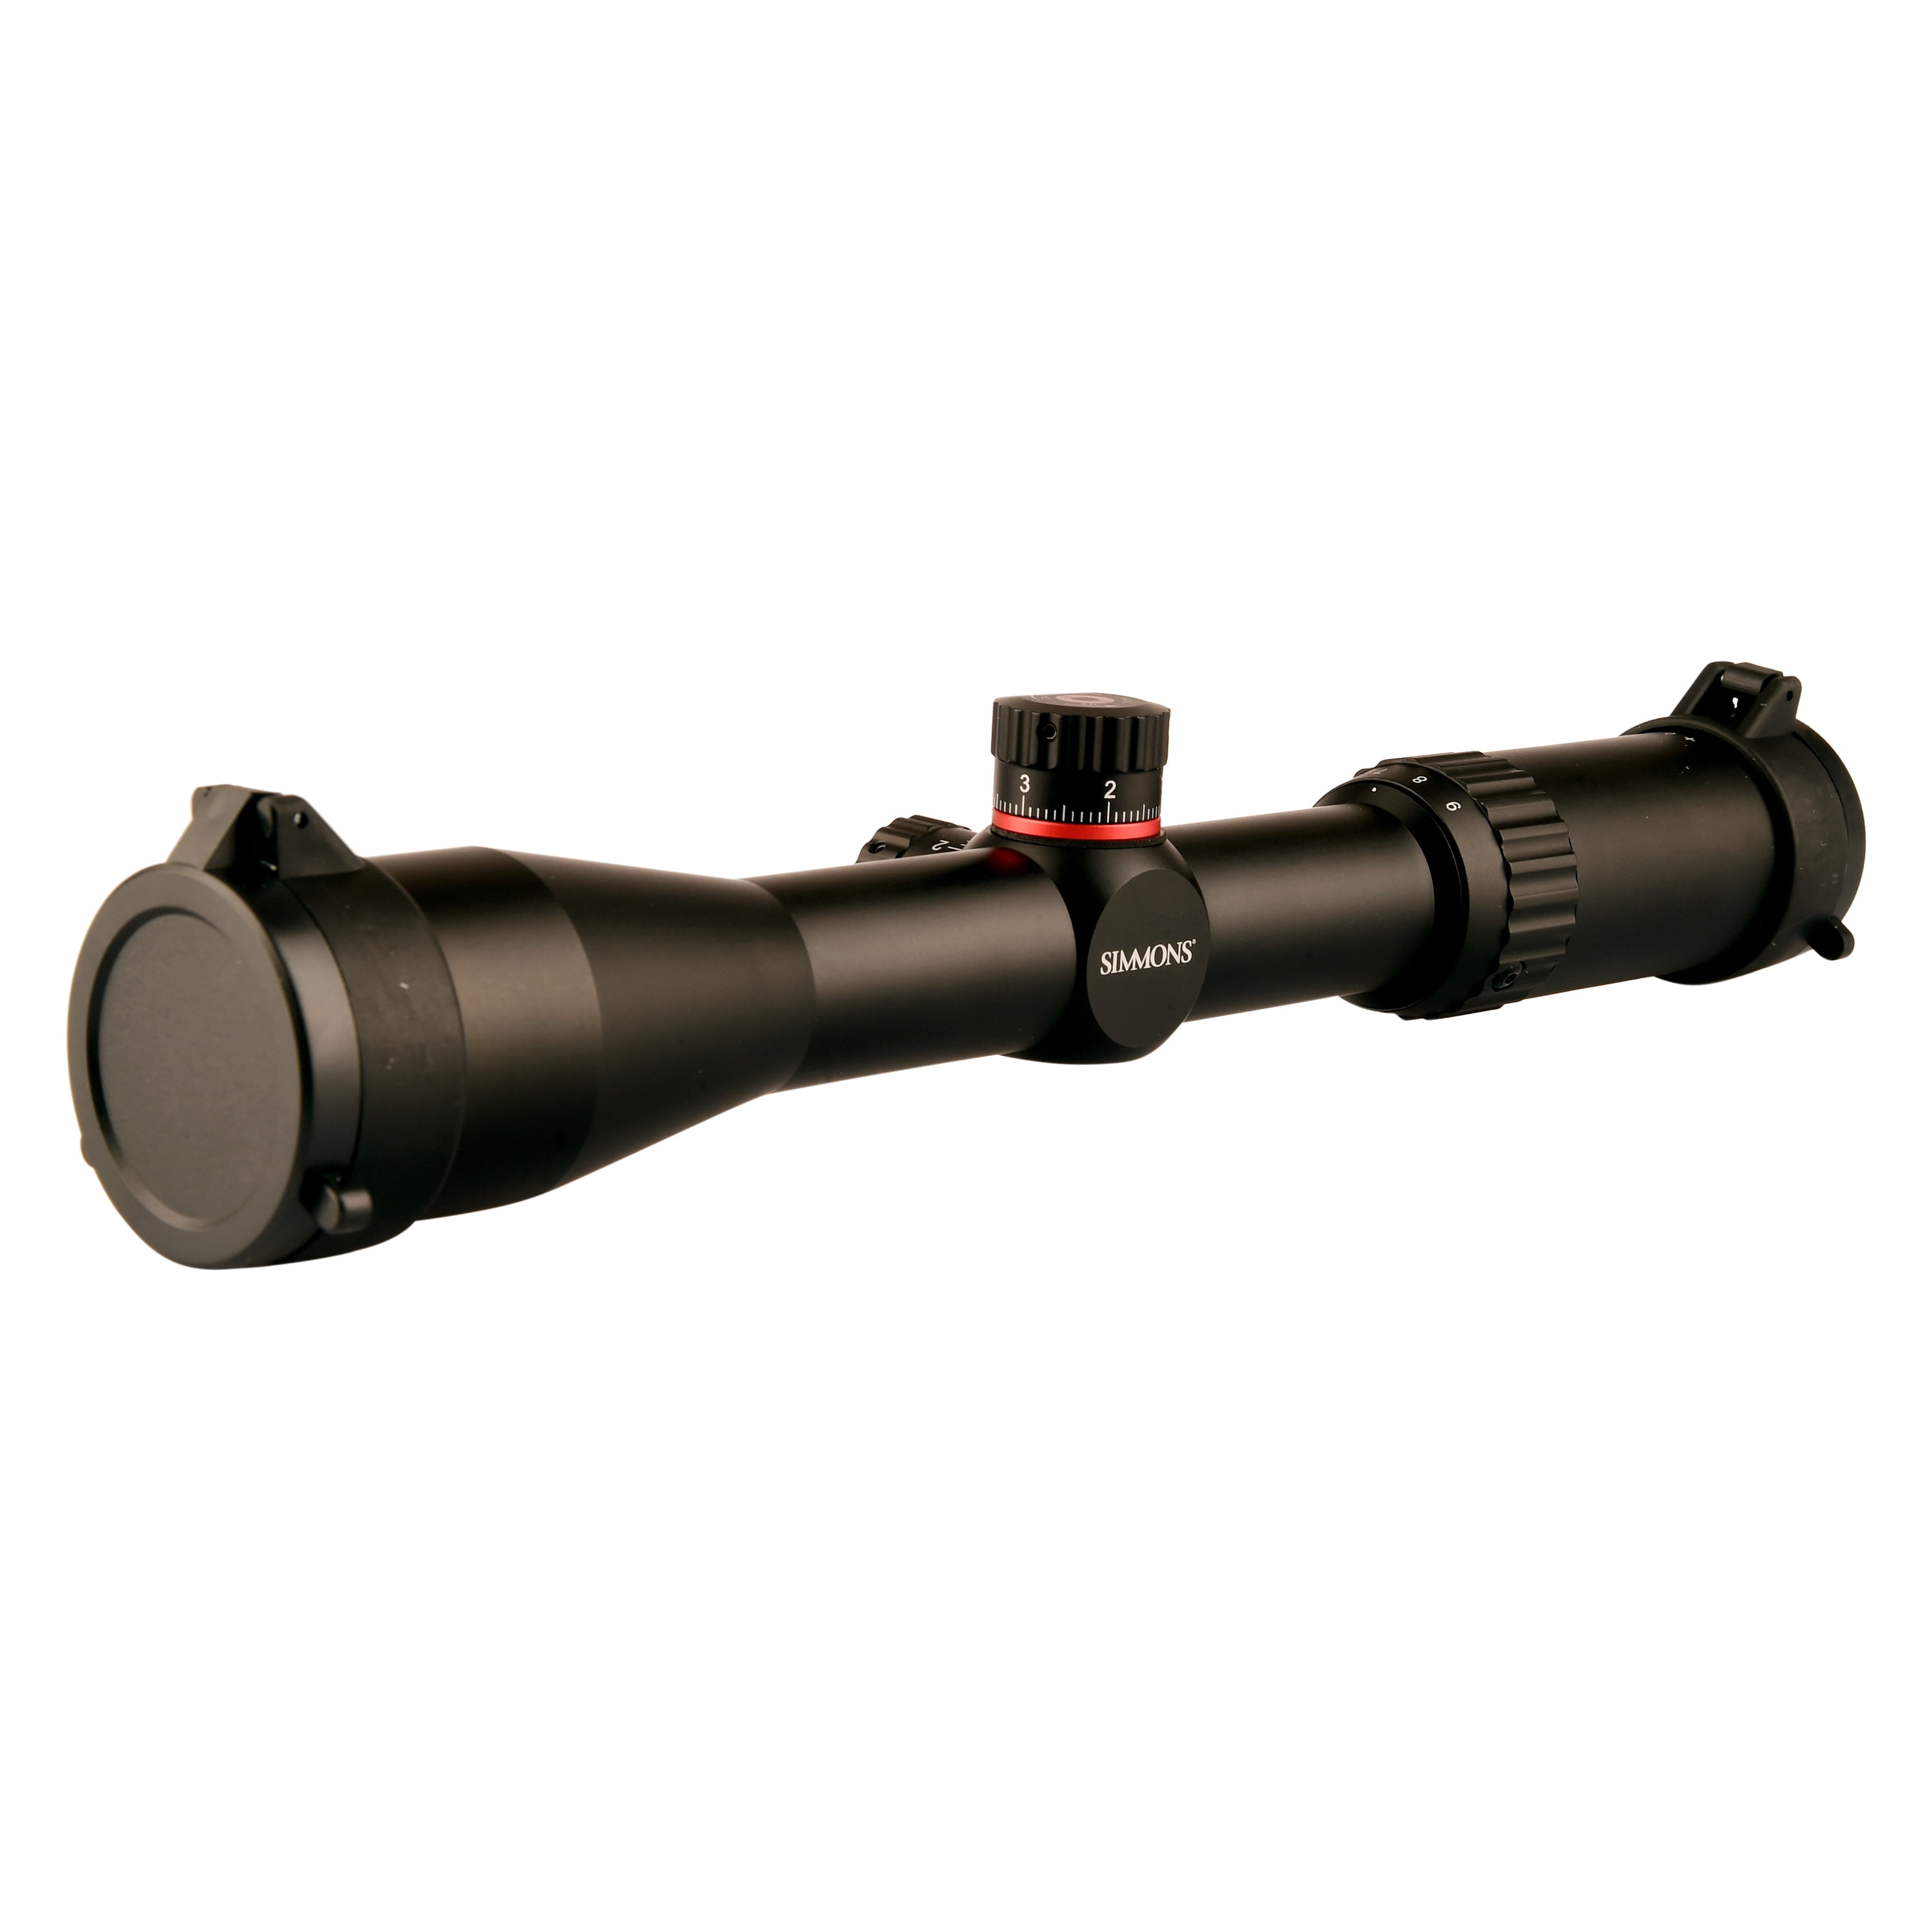 Simmons Riflescope 3-9x40 with Rings 